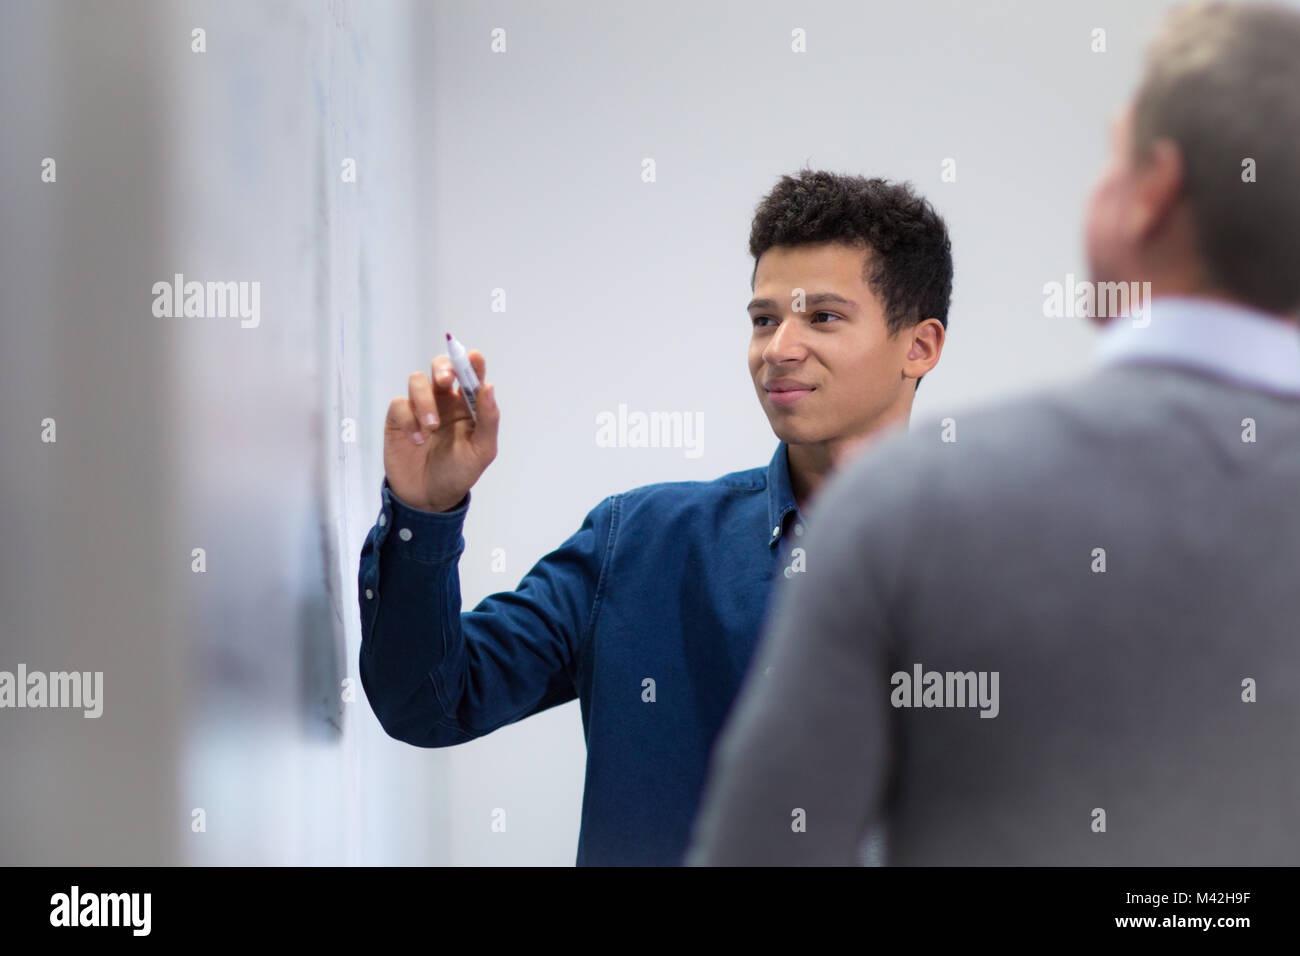 Student at a whiteboard with pen Stock Photo